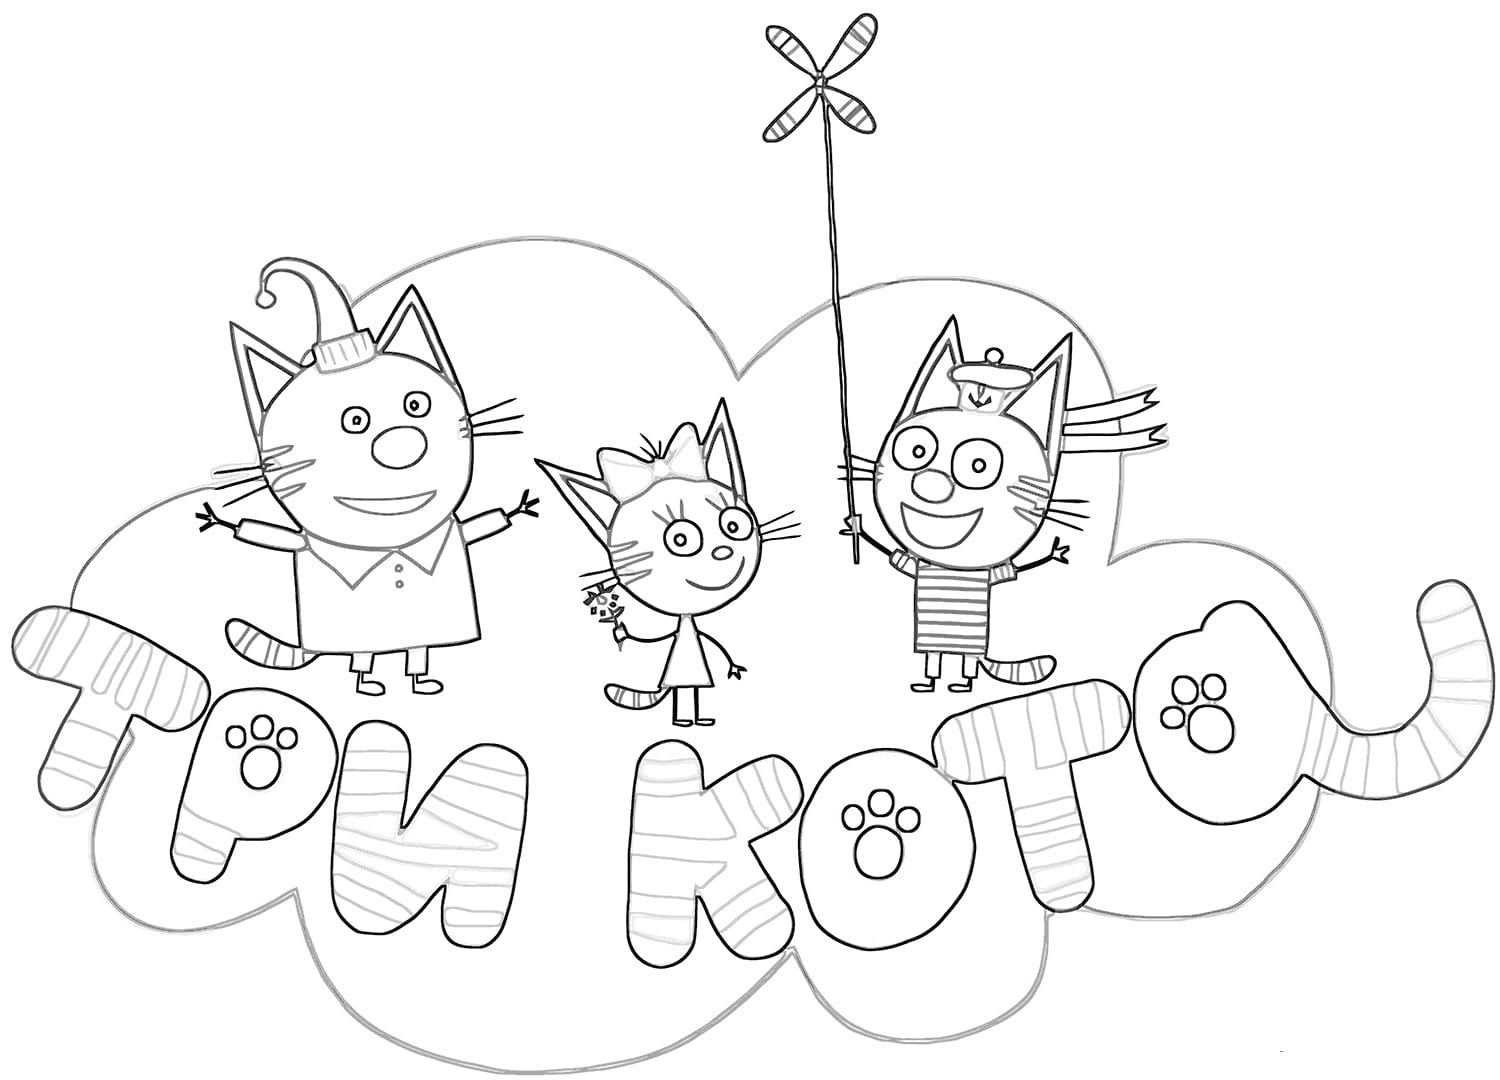 Witty three cats coloring pages for kids